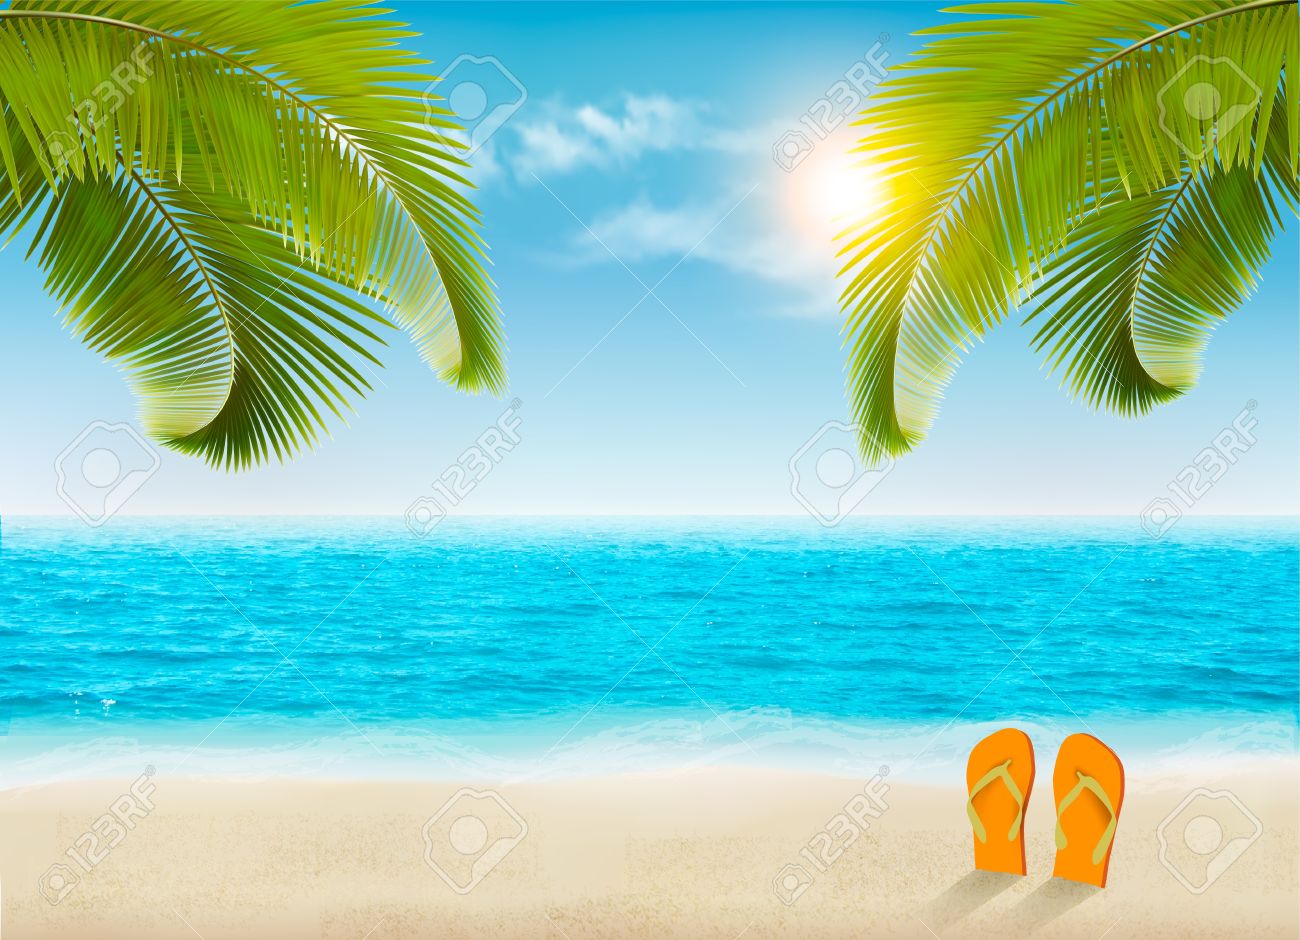 Vacation Background Beach With Palm Trees And Blue Sea Vector